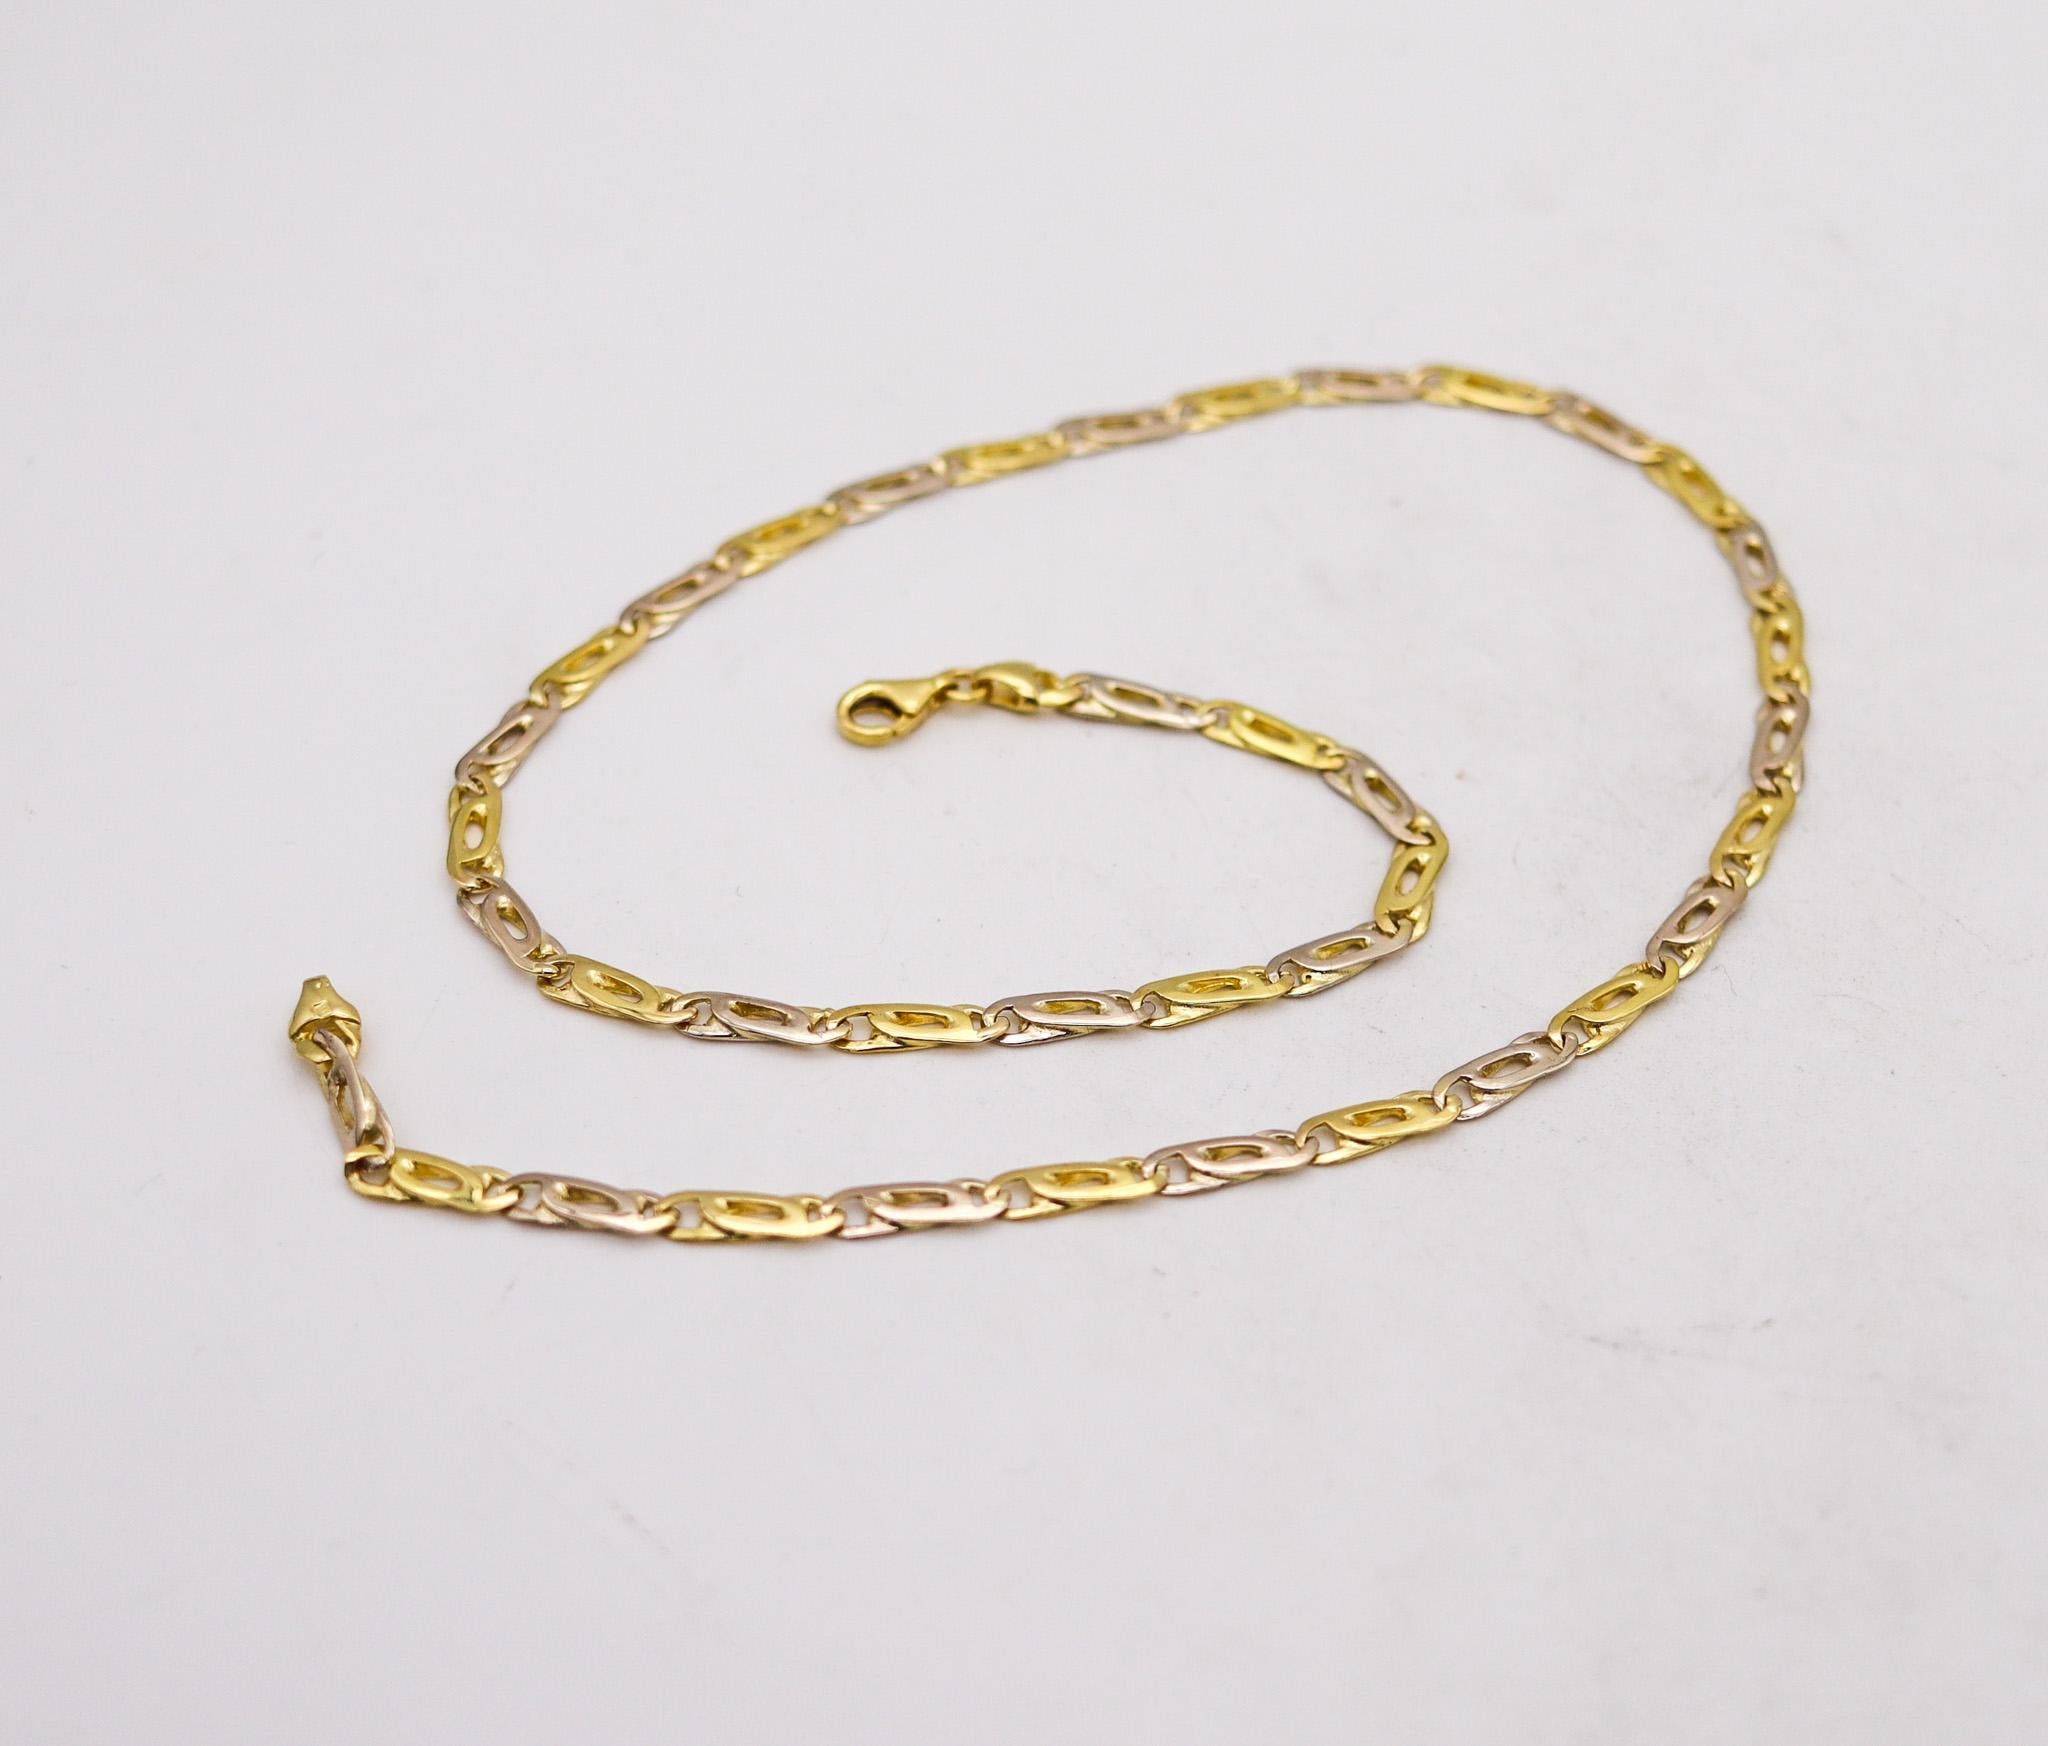 Italian Modernist Two Tones Links Chain in Solid 18Kt White And Yellow Gold For Sale 1